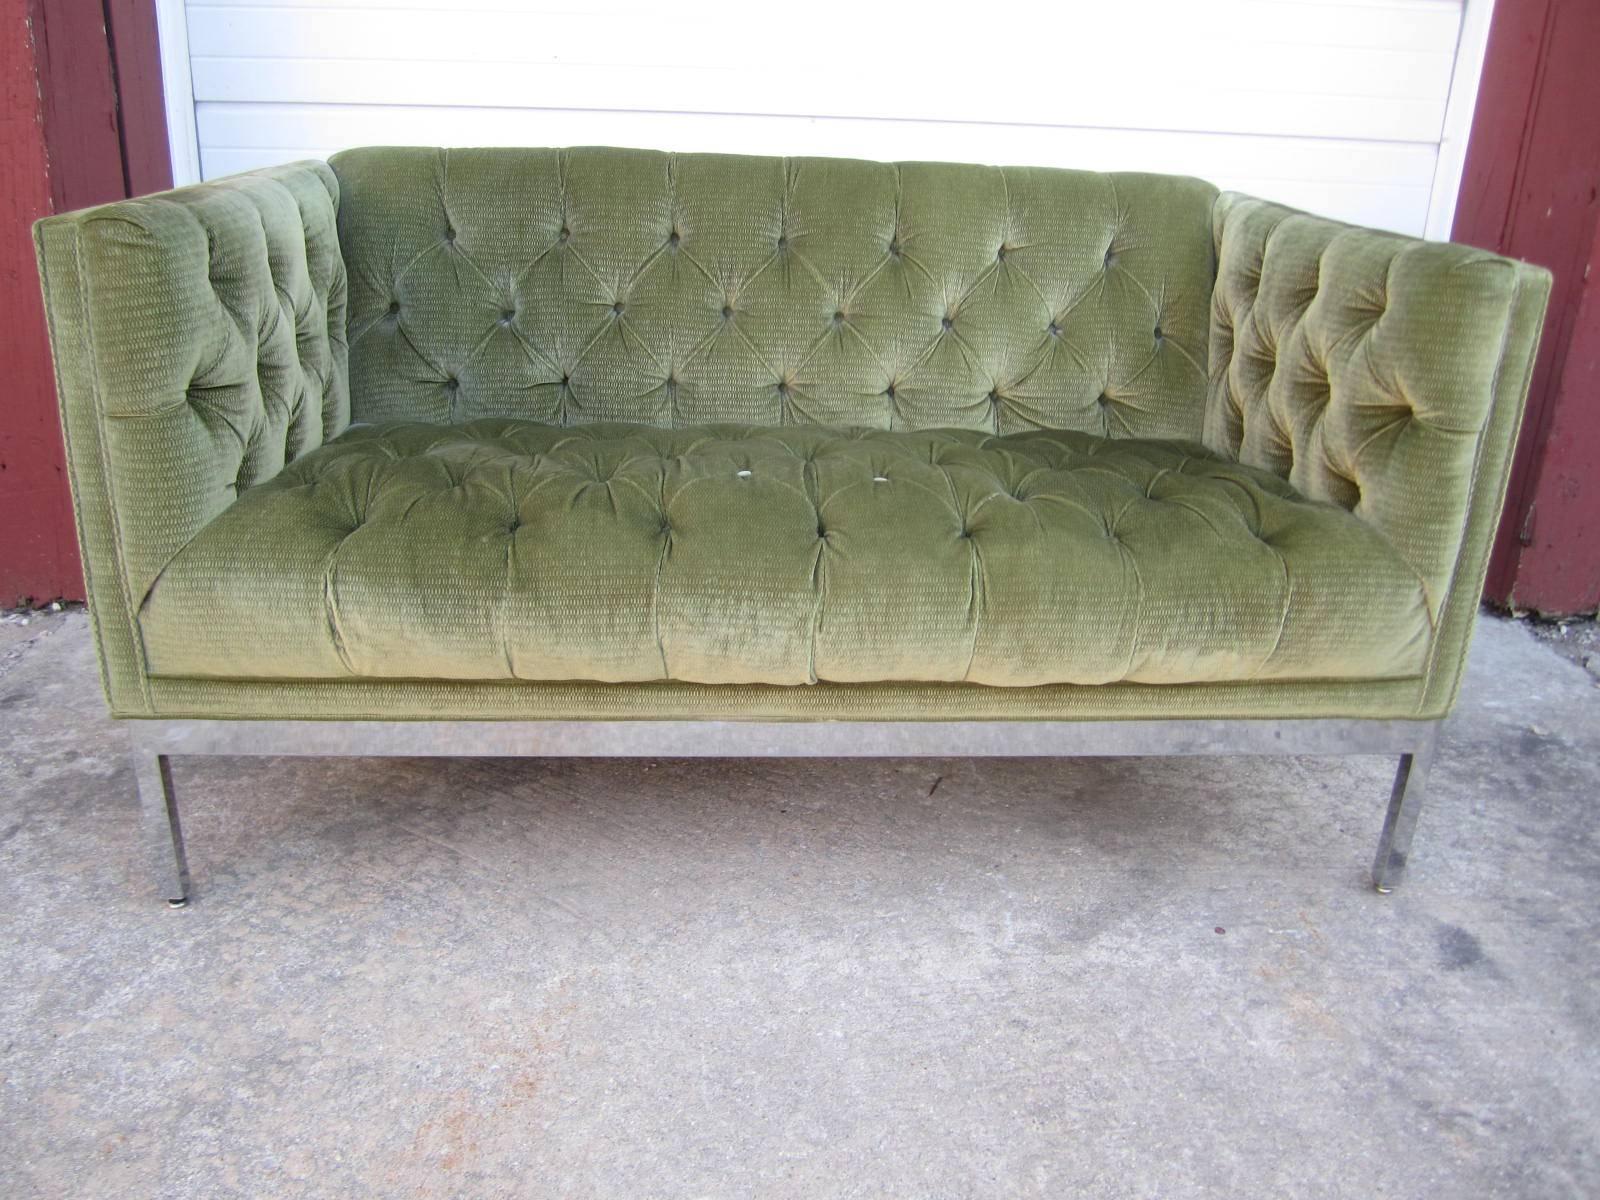 Gorgeous pair of Milo Baughman style tufted loveseats. The fabric on each is different but still in good condition. These would be fabulous reupholstered in matching fabric. Heavy chromed frames are in great condition.